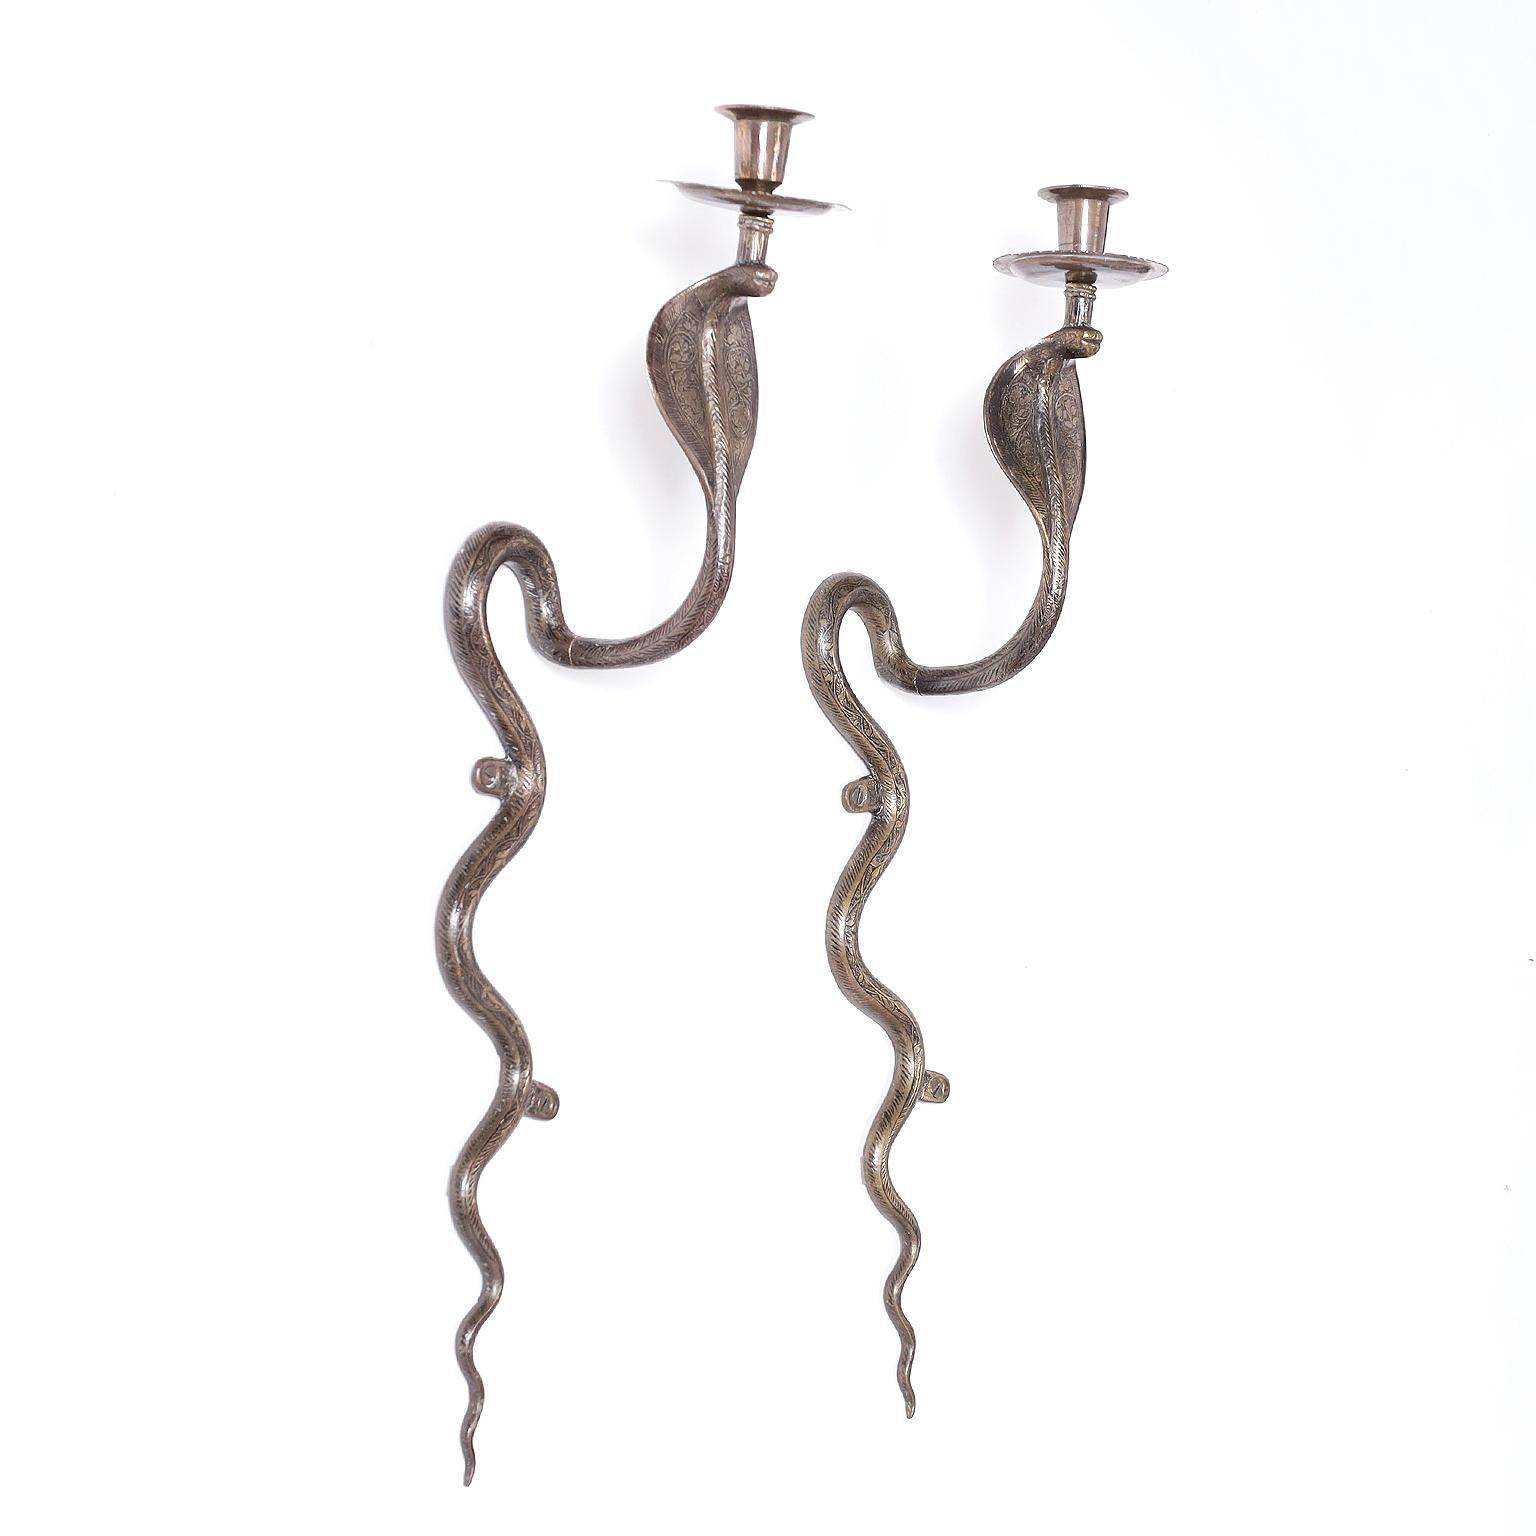 Pair of Anglo Indian wall sconces crafted in brass in the form of a cobra and decorated with engraved floral designs.